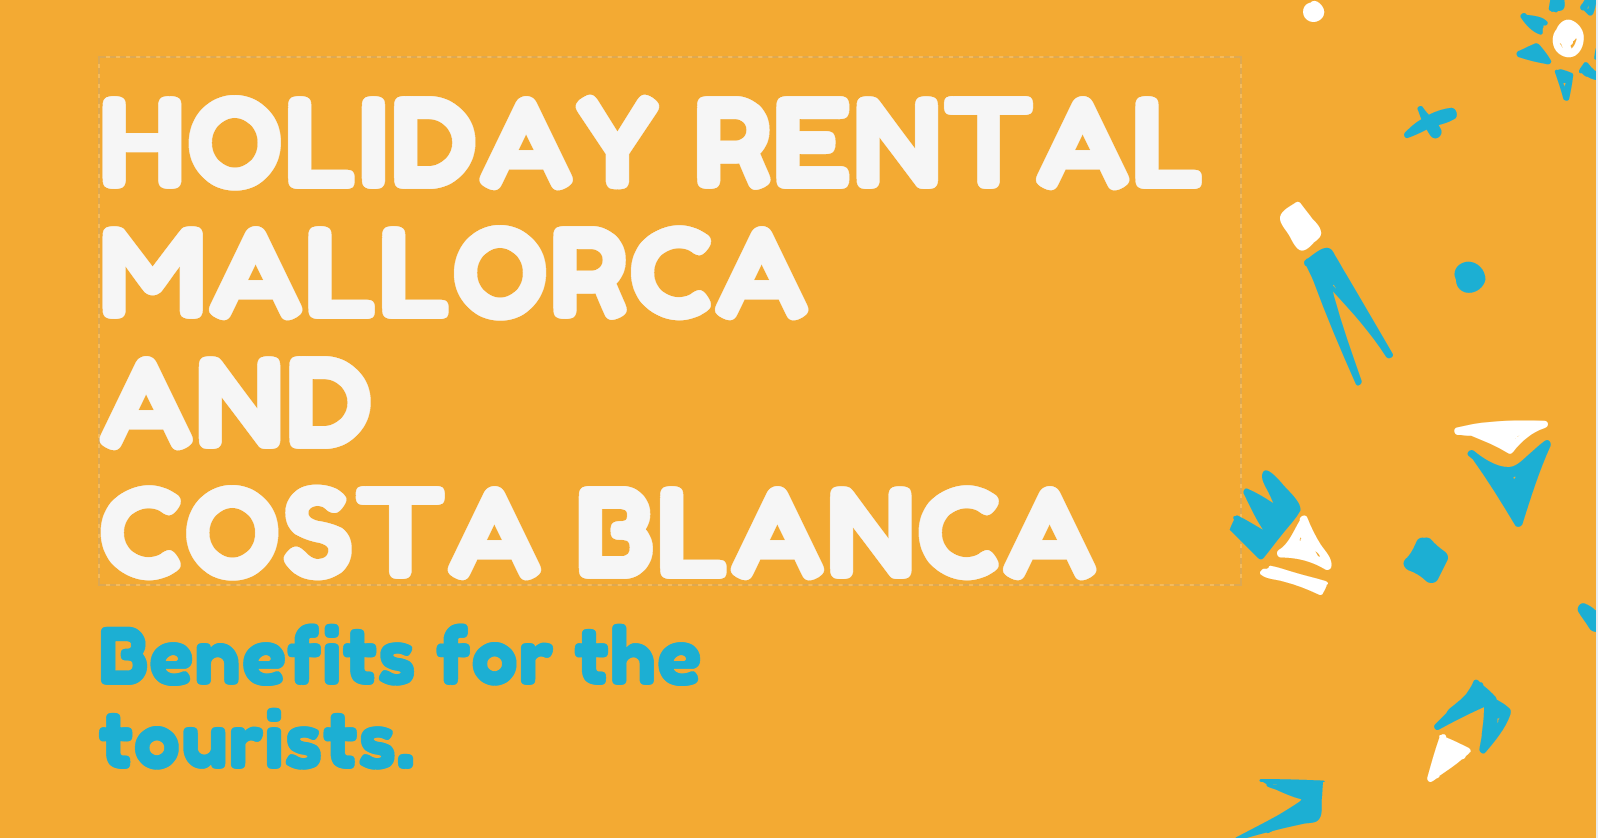 Holiday Rental in Mallorca and Costa blanca: Benefits for the tourists